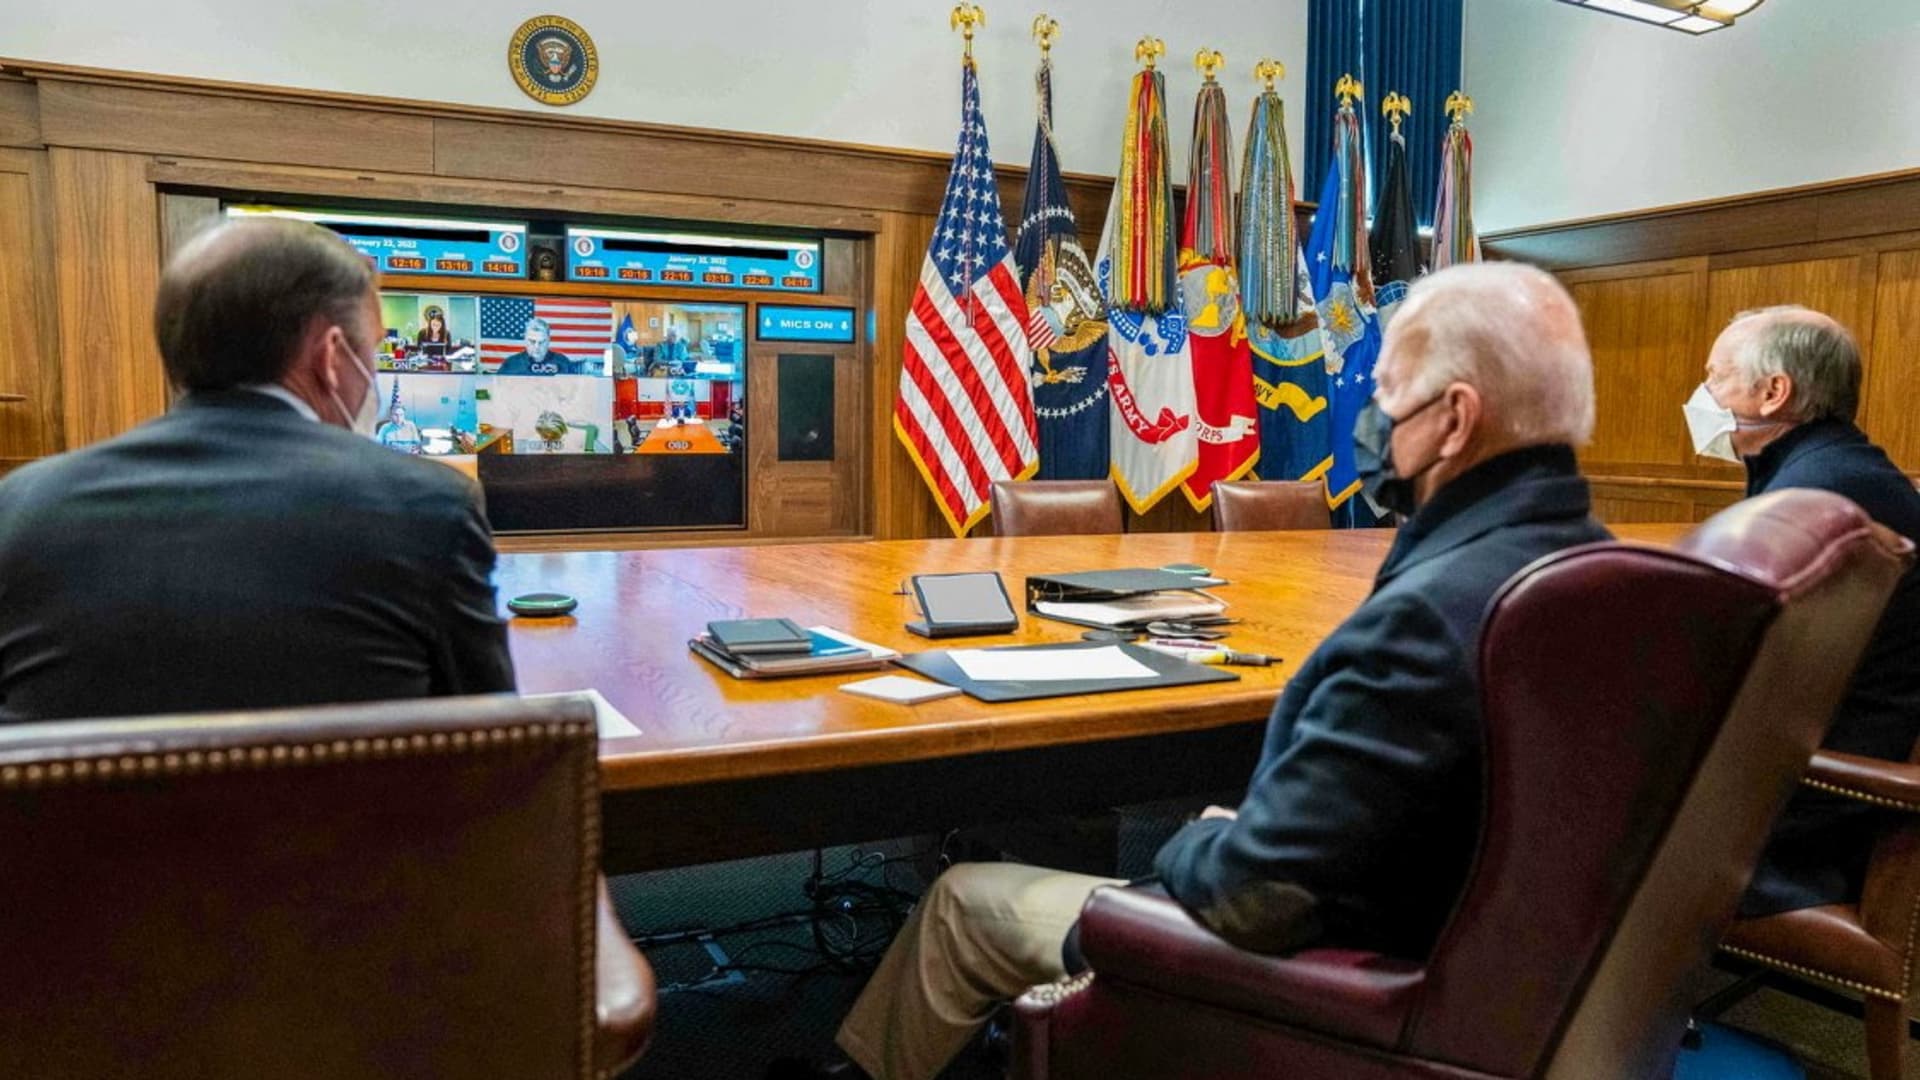 U.S. President Joe Biden holds a meeting with his national security team on the Russia-Ukraine crisis, at Camp David, in Maryland, U.S. January 22, 2022.